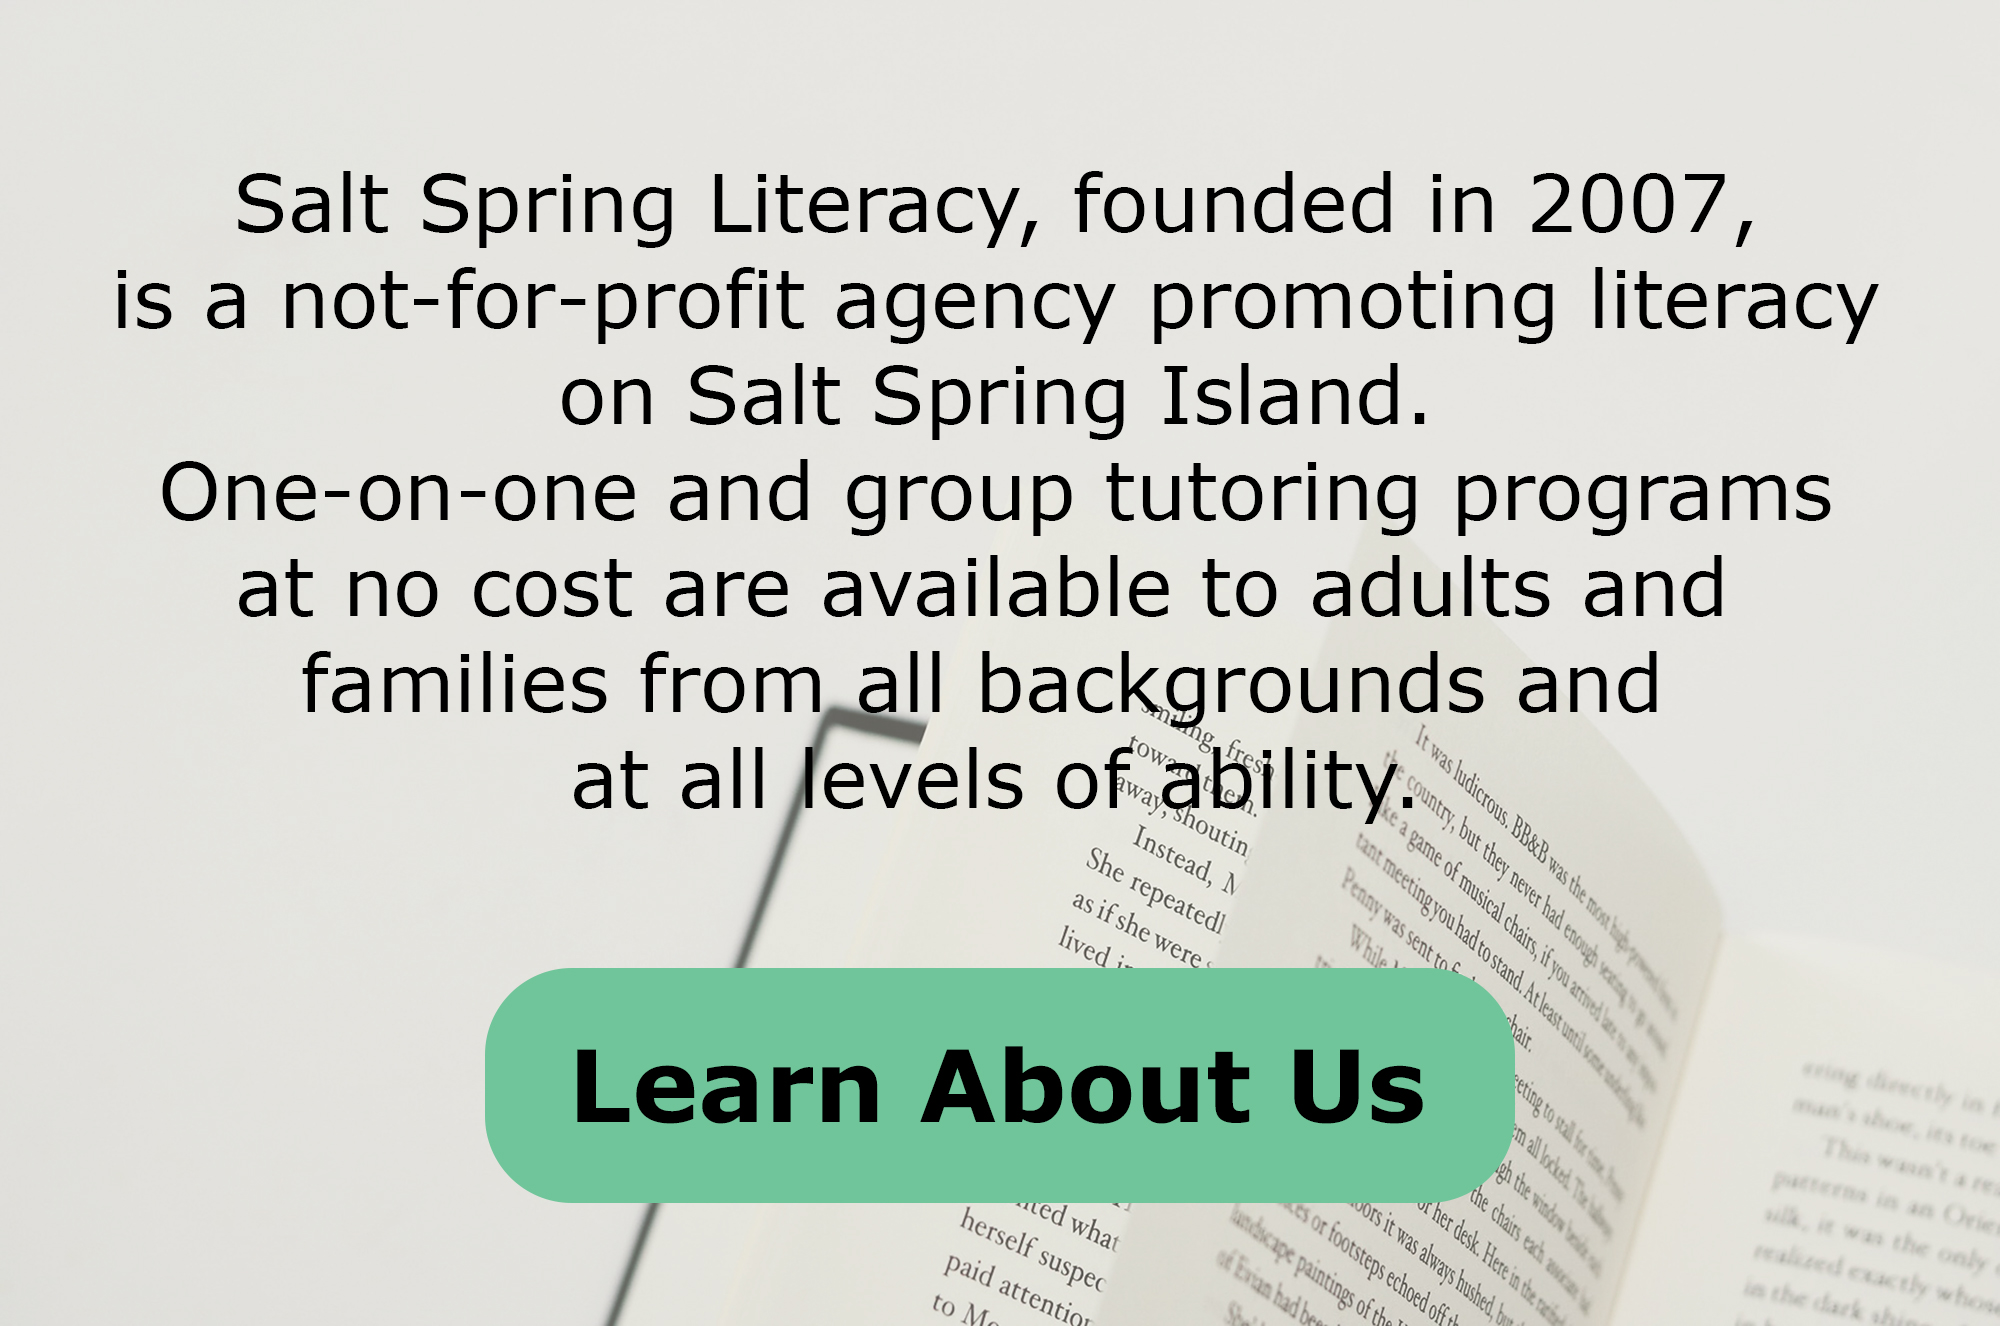 Salt Spring Literacy, founded in 2007, is a not-for-profit agency promoting literacy on Salt Spring Island. One-on-one and group tutoring programs at no cost are available to adults and families from all backgrounds and at all levels of ability. *Button* Learn About Us